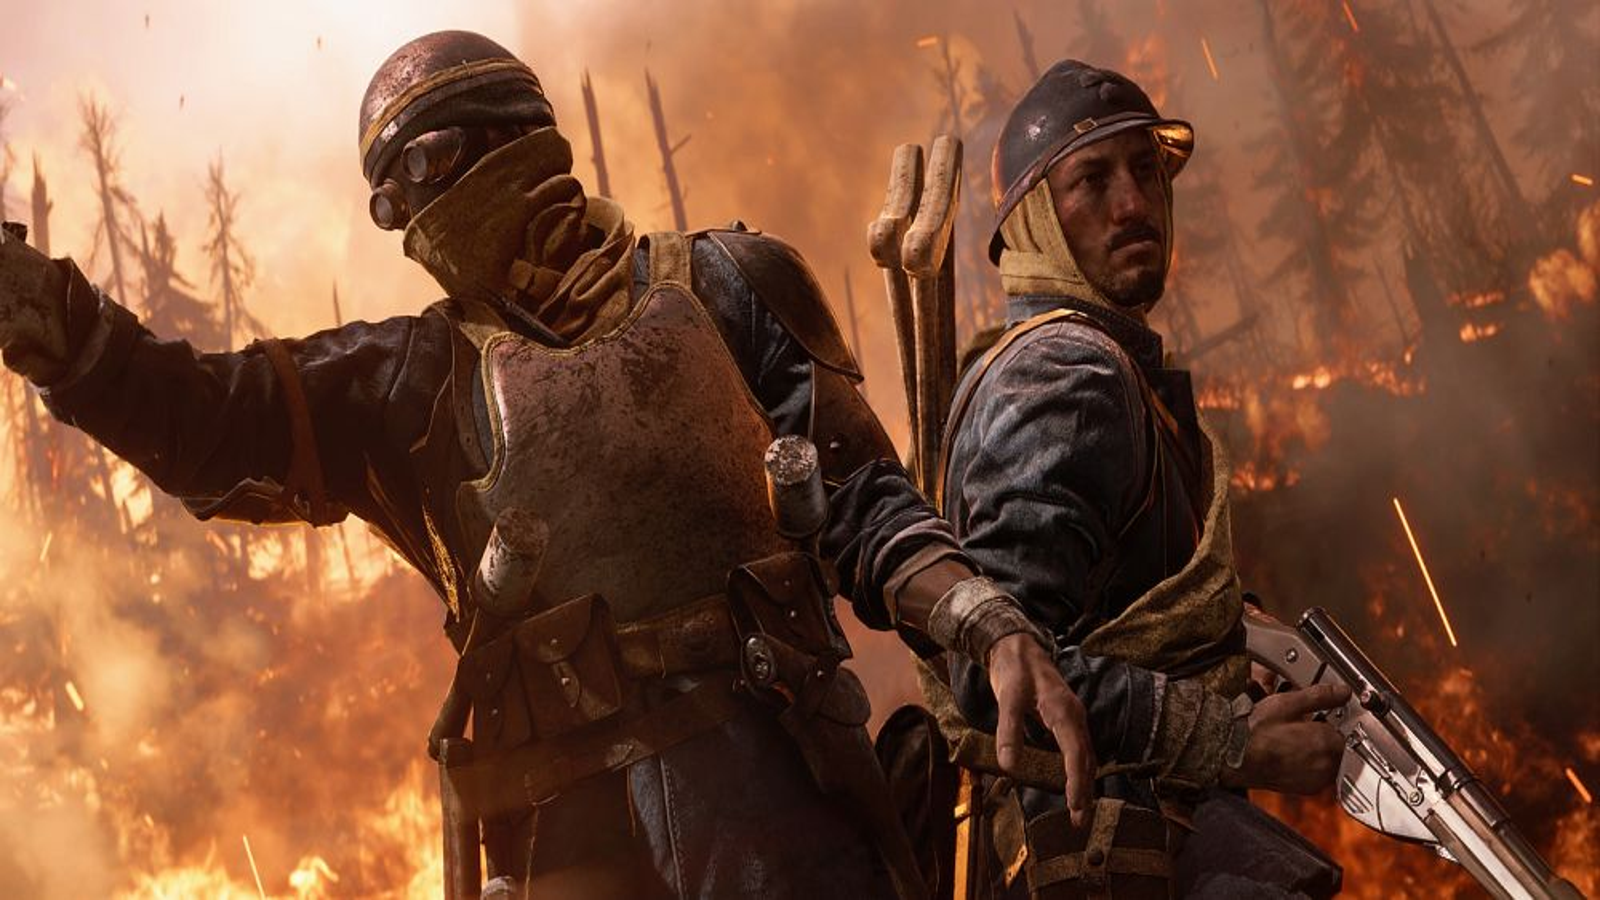 Battlefield 1 Multiplayer Review - Hold To Reset